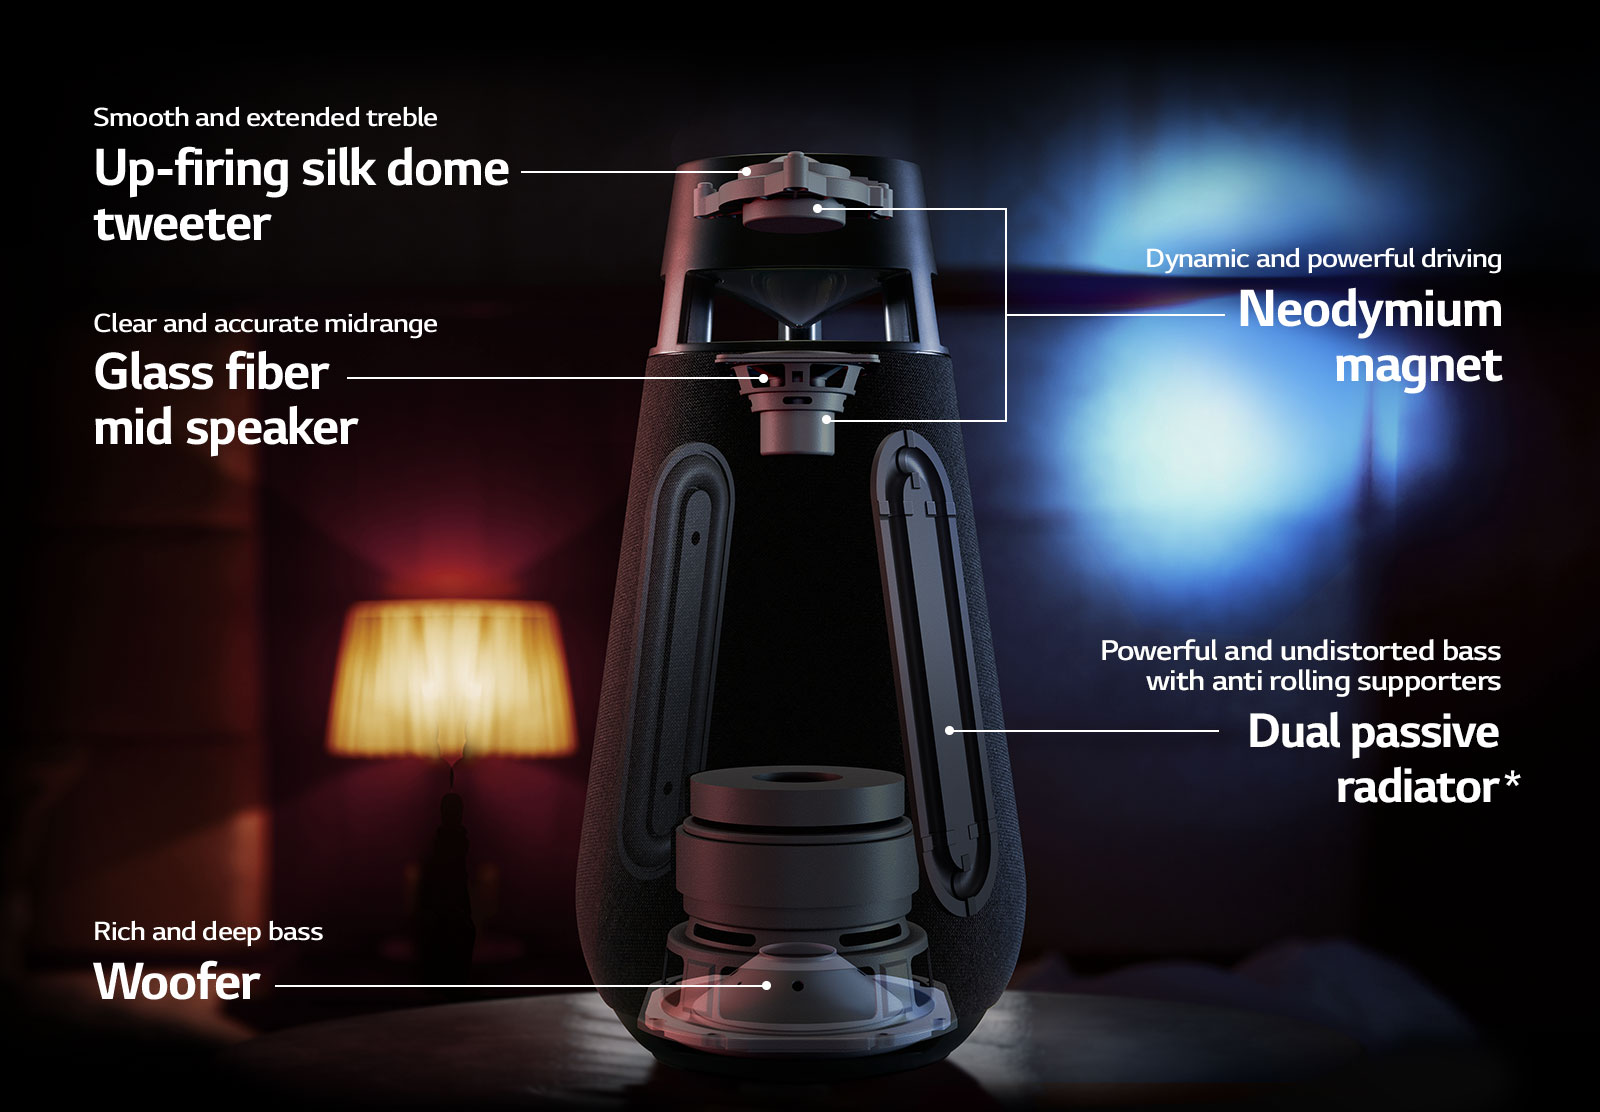 "An image of XBOOM 360 XO3 explaining the Structure of the XO3. Showing how XO3 are made with; Up-firing silk dome tweeter, Glass fiber mid spekaer, Neodymium magnet, Woofer, Dual passive radiator."